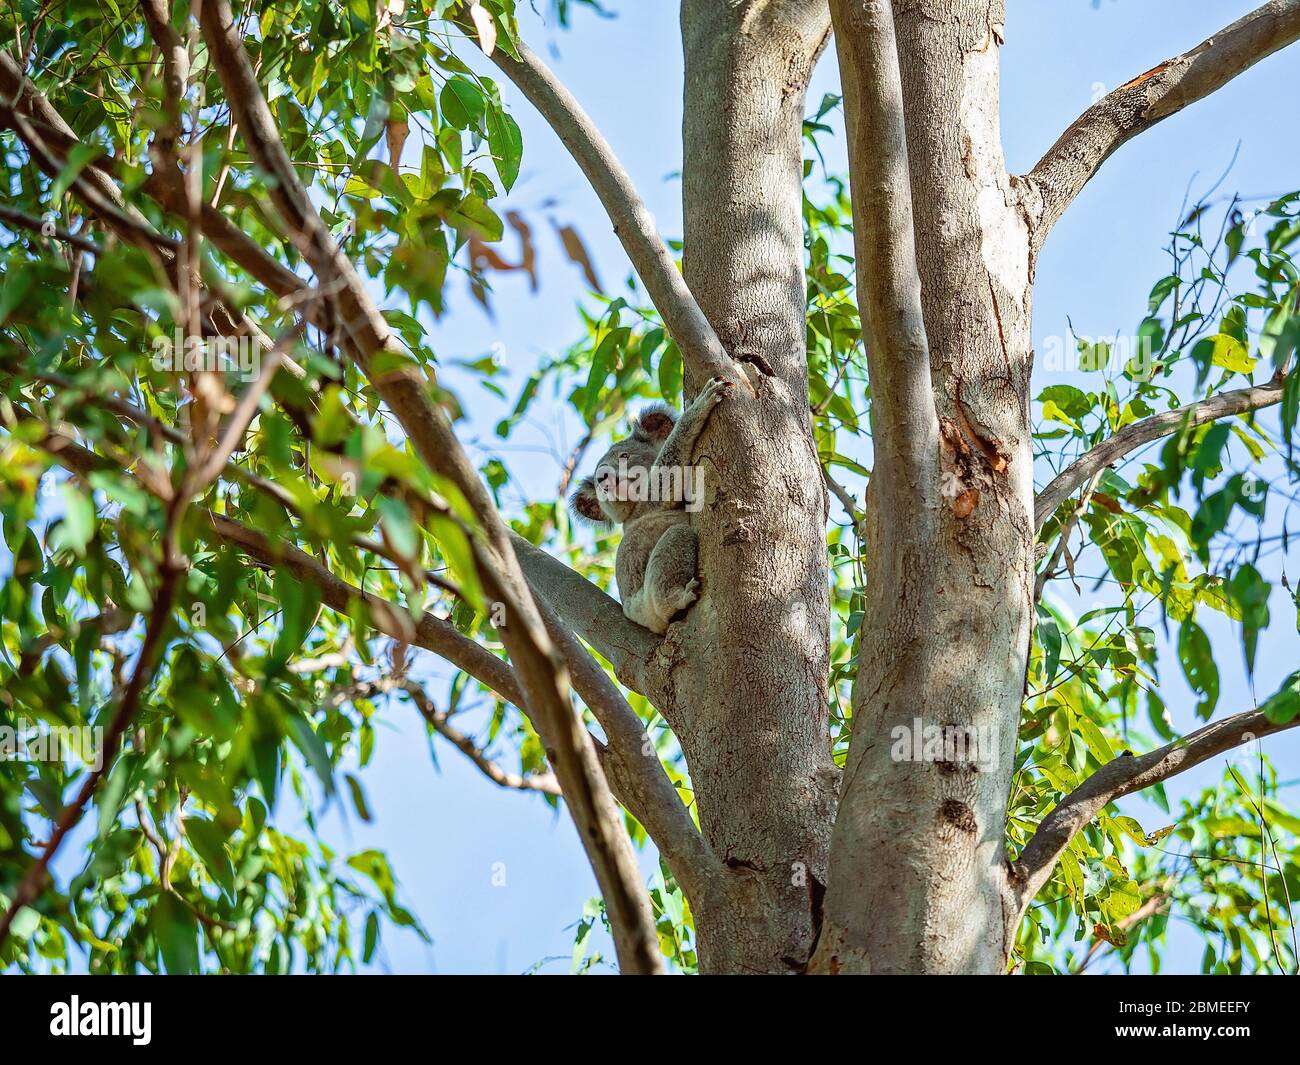 An Australian koala sitting on the branch of a tree in his native environment, the eucalyptus forest Stock Photo